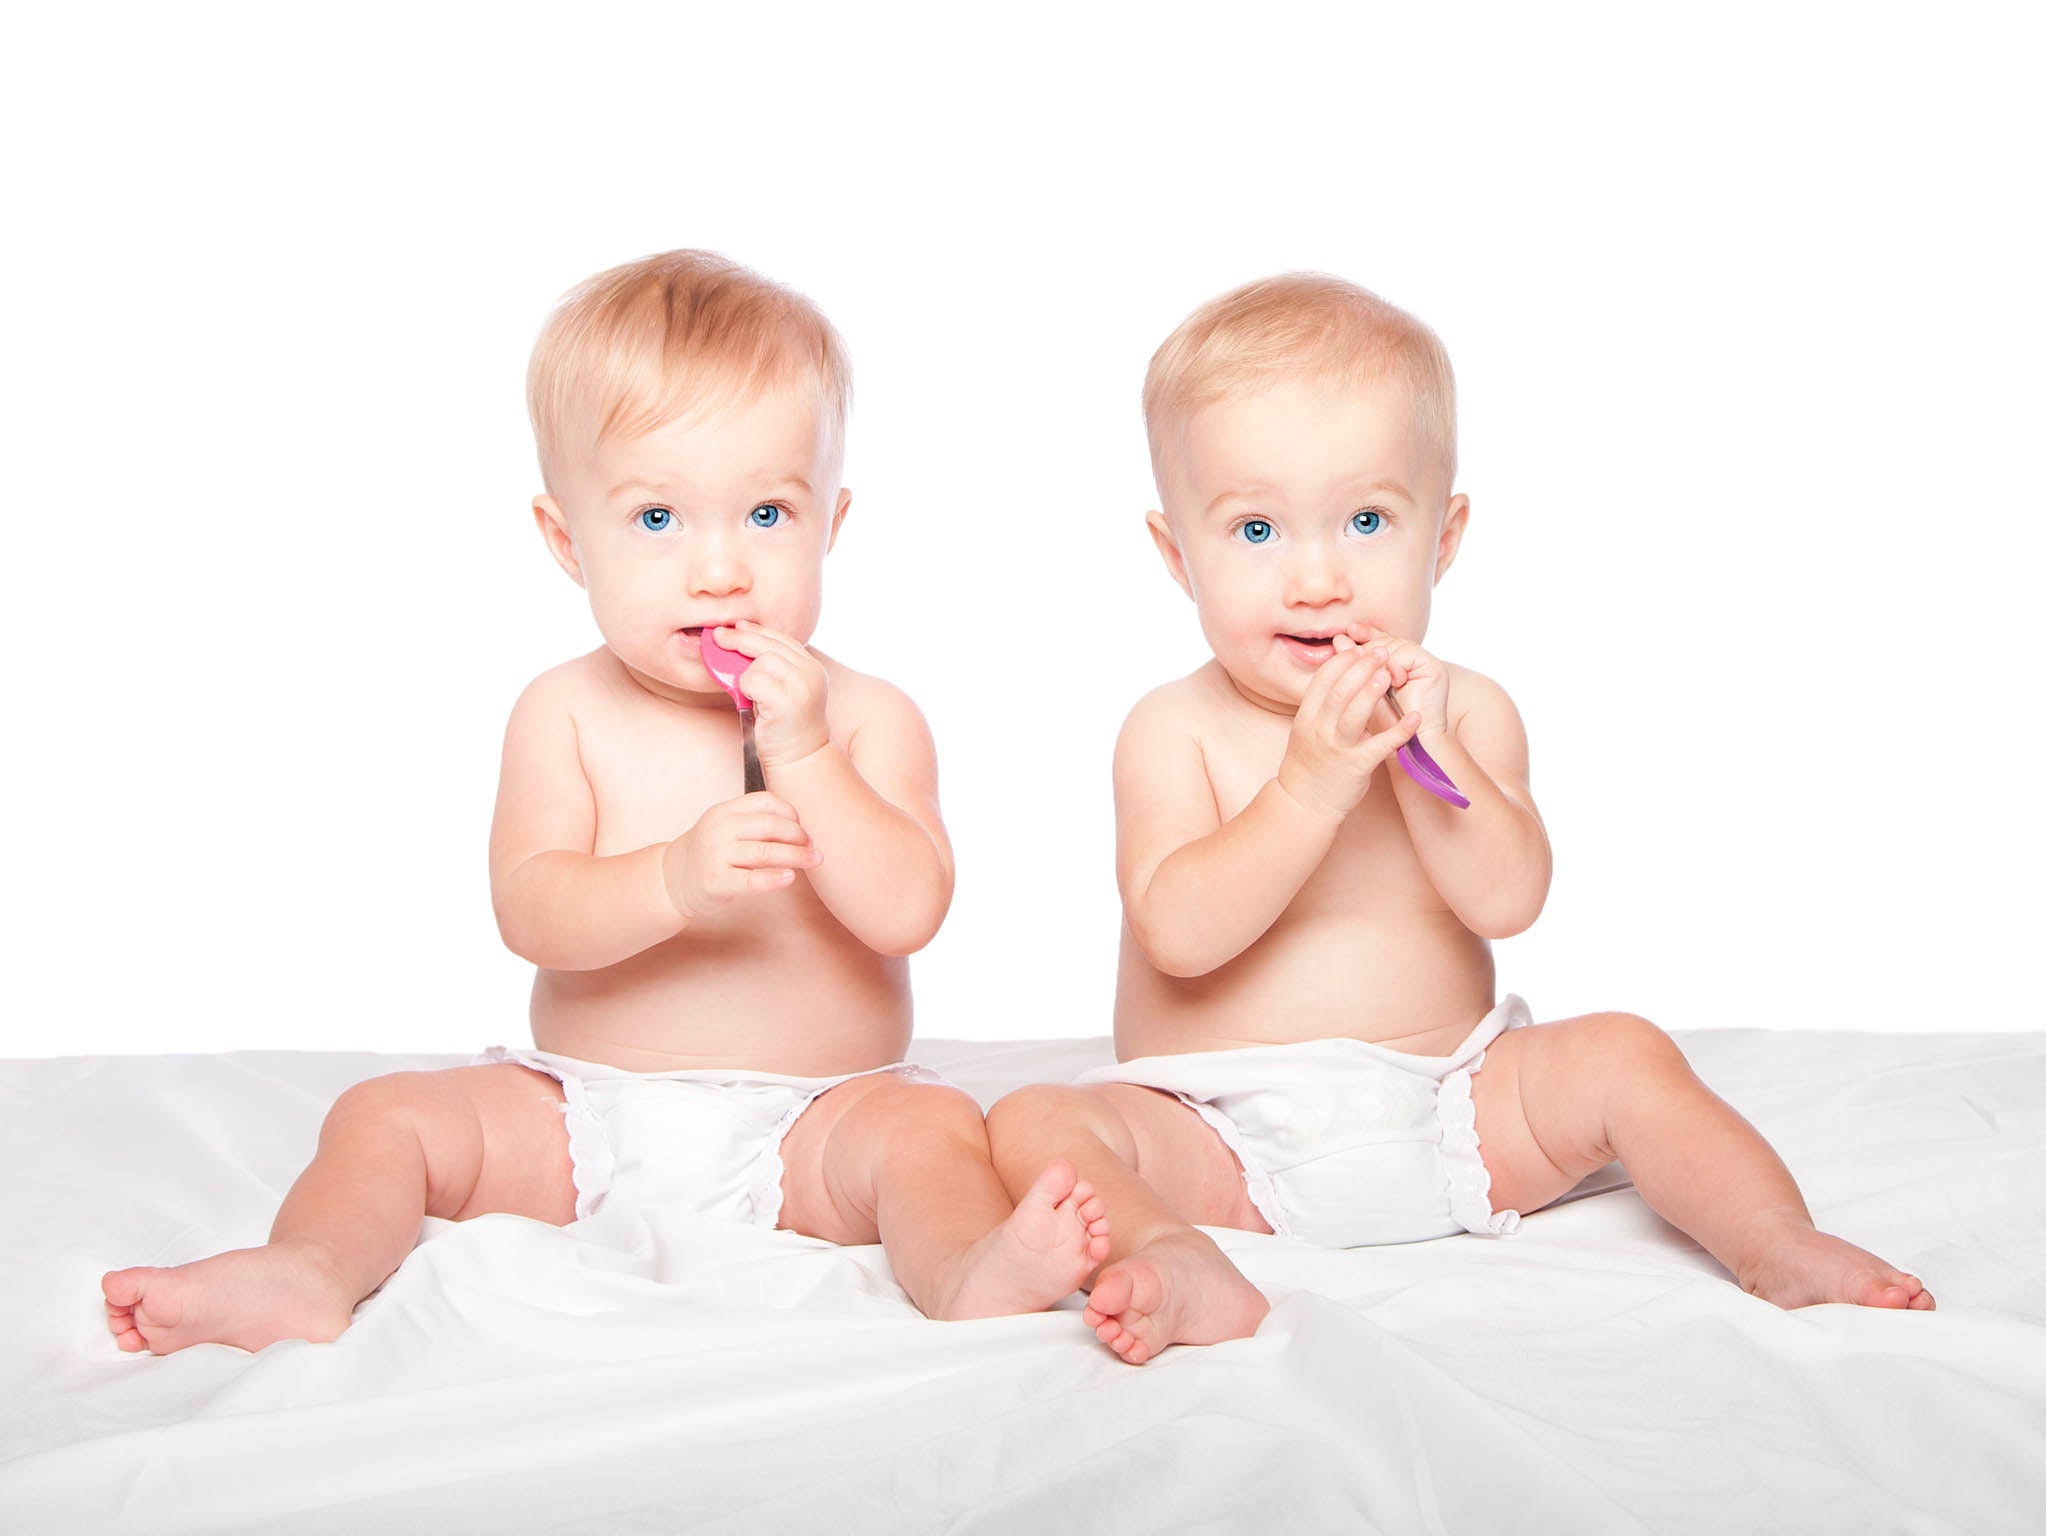 Twin births almost double over past 40 years in ‘rich’ countries The